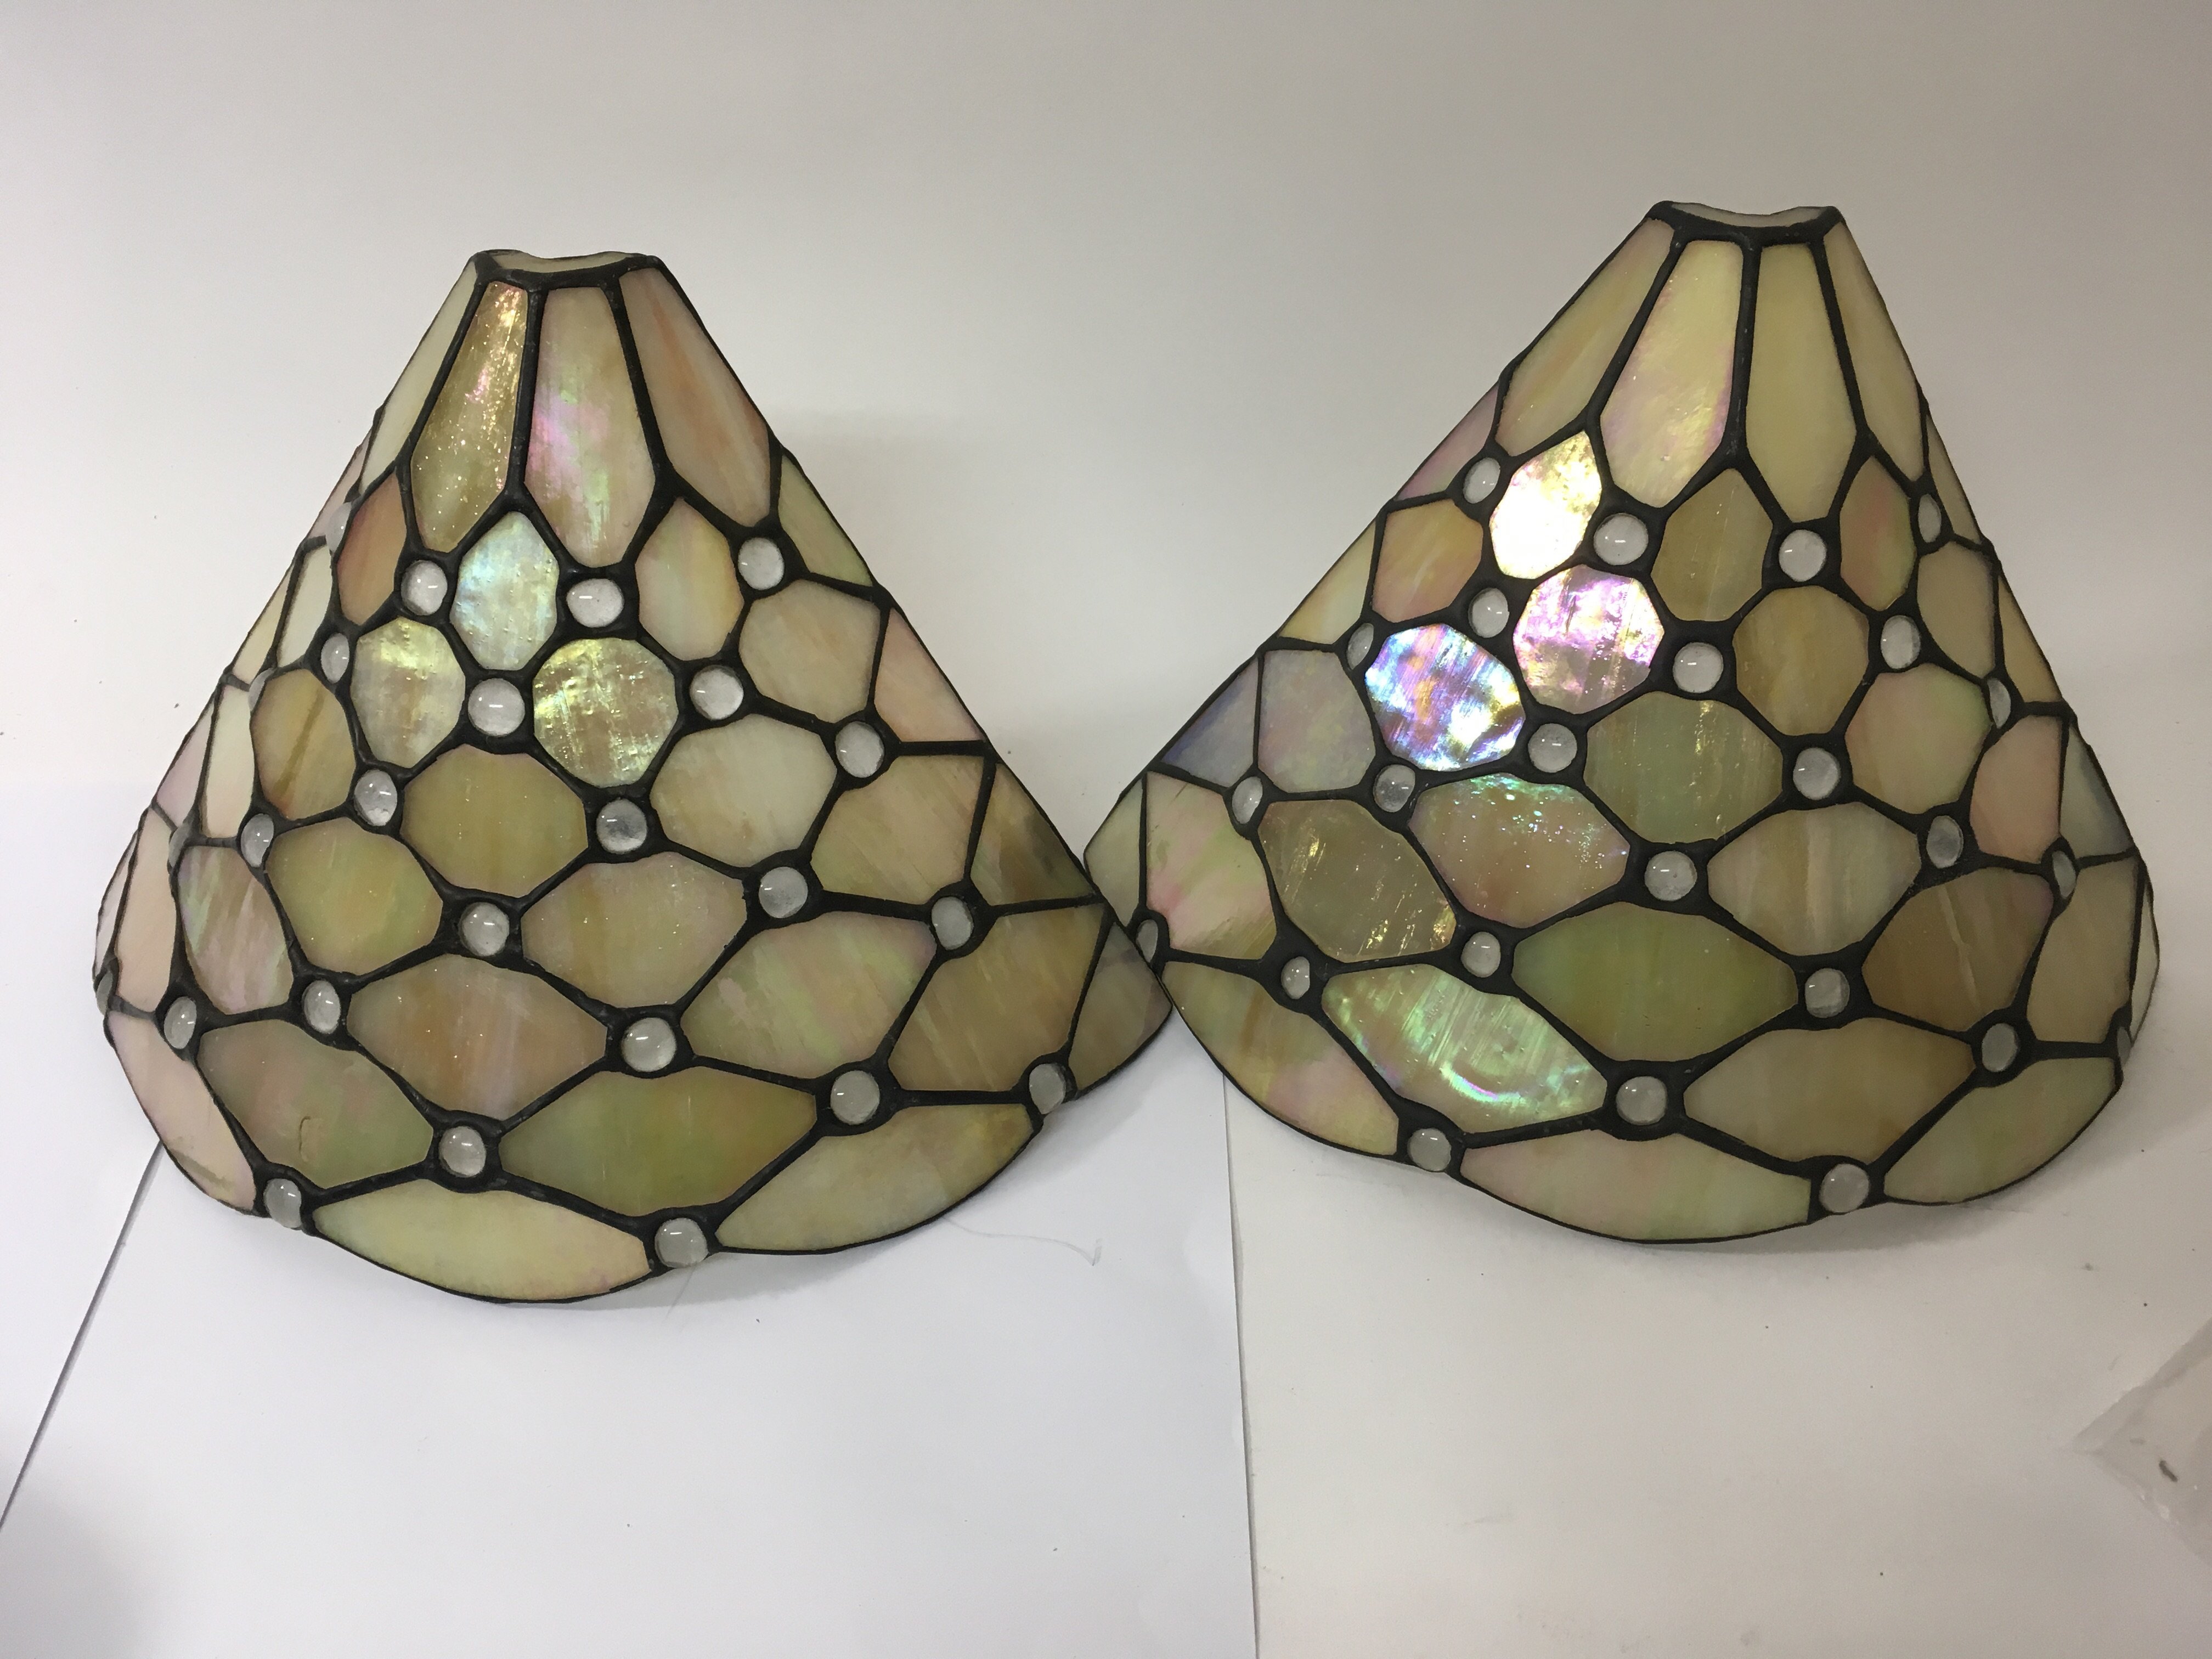 A Tiffany style ceiling light and two wall lights.